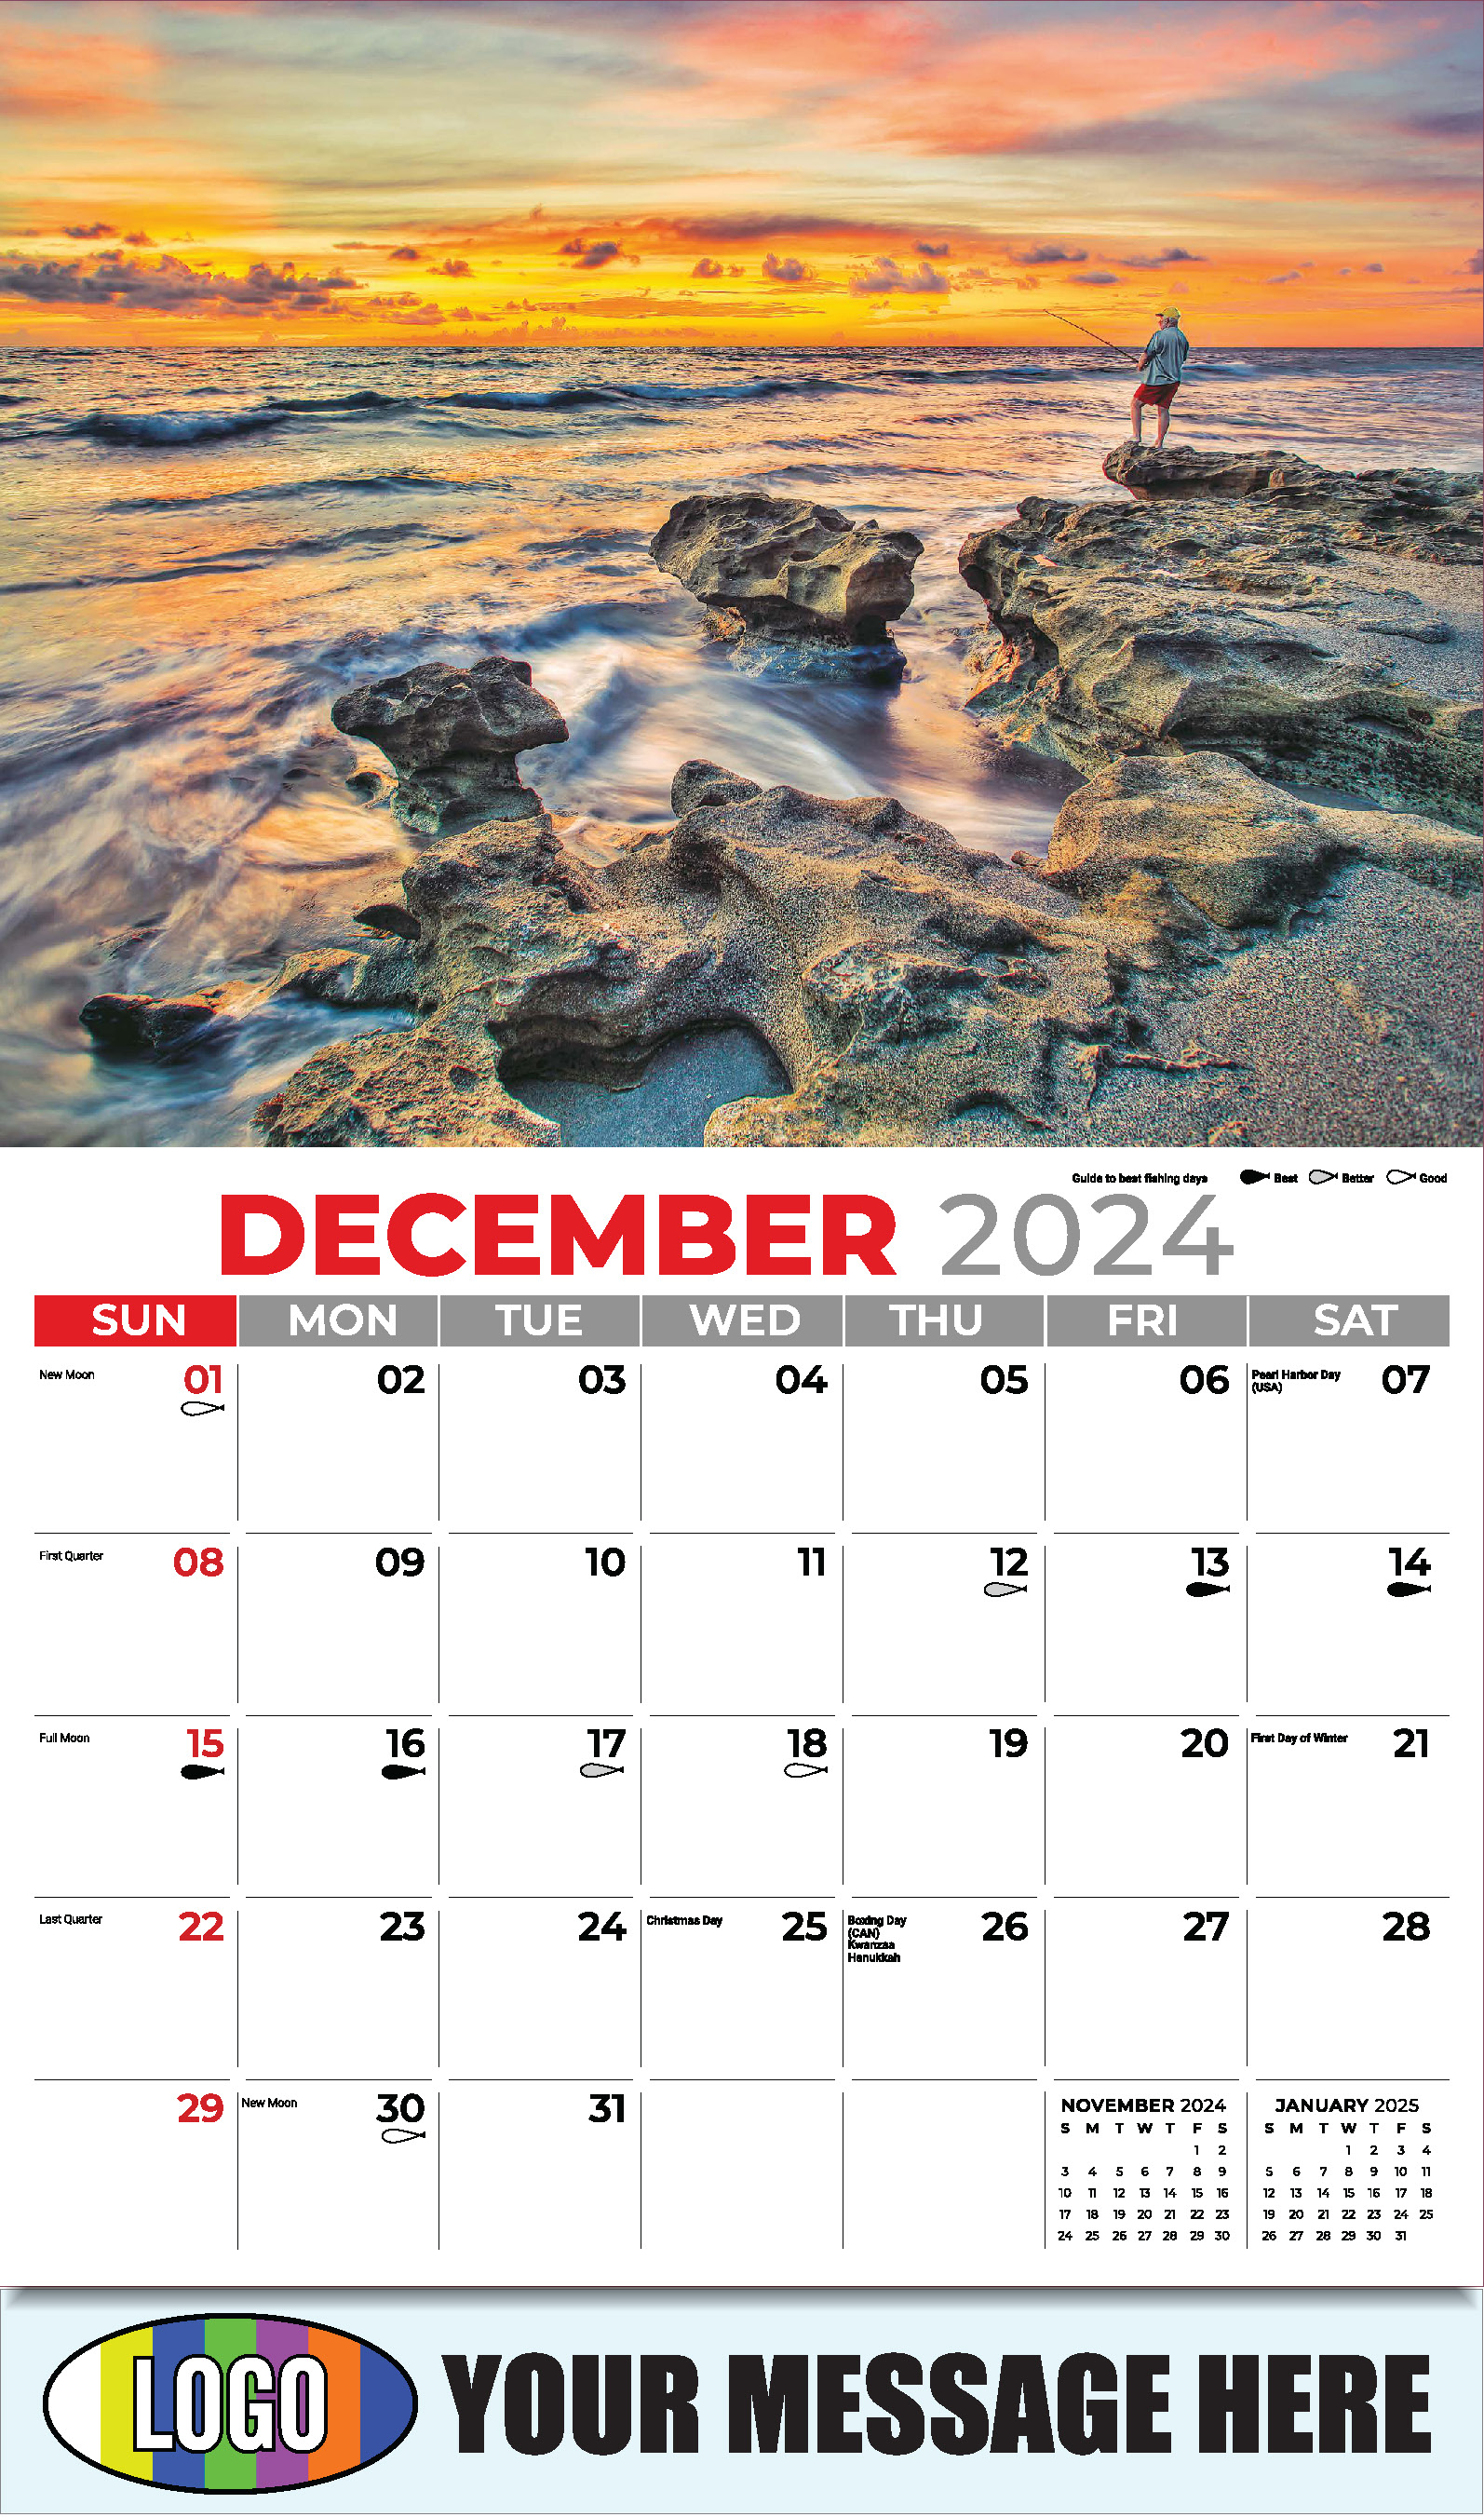 Fishing and Hunting 2025 Business Promotion Calendar - December_a